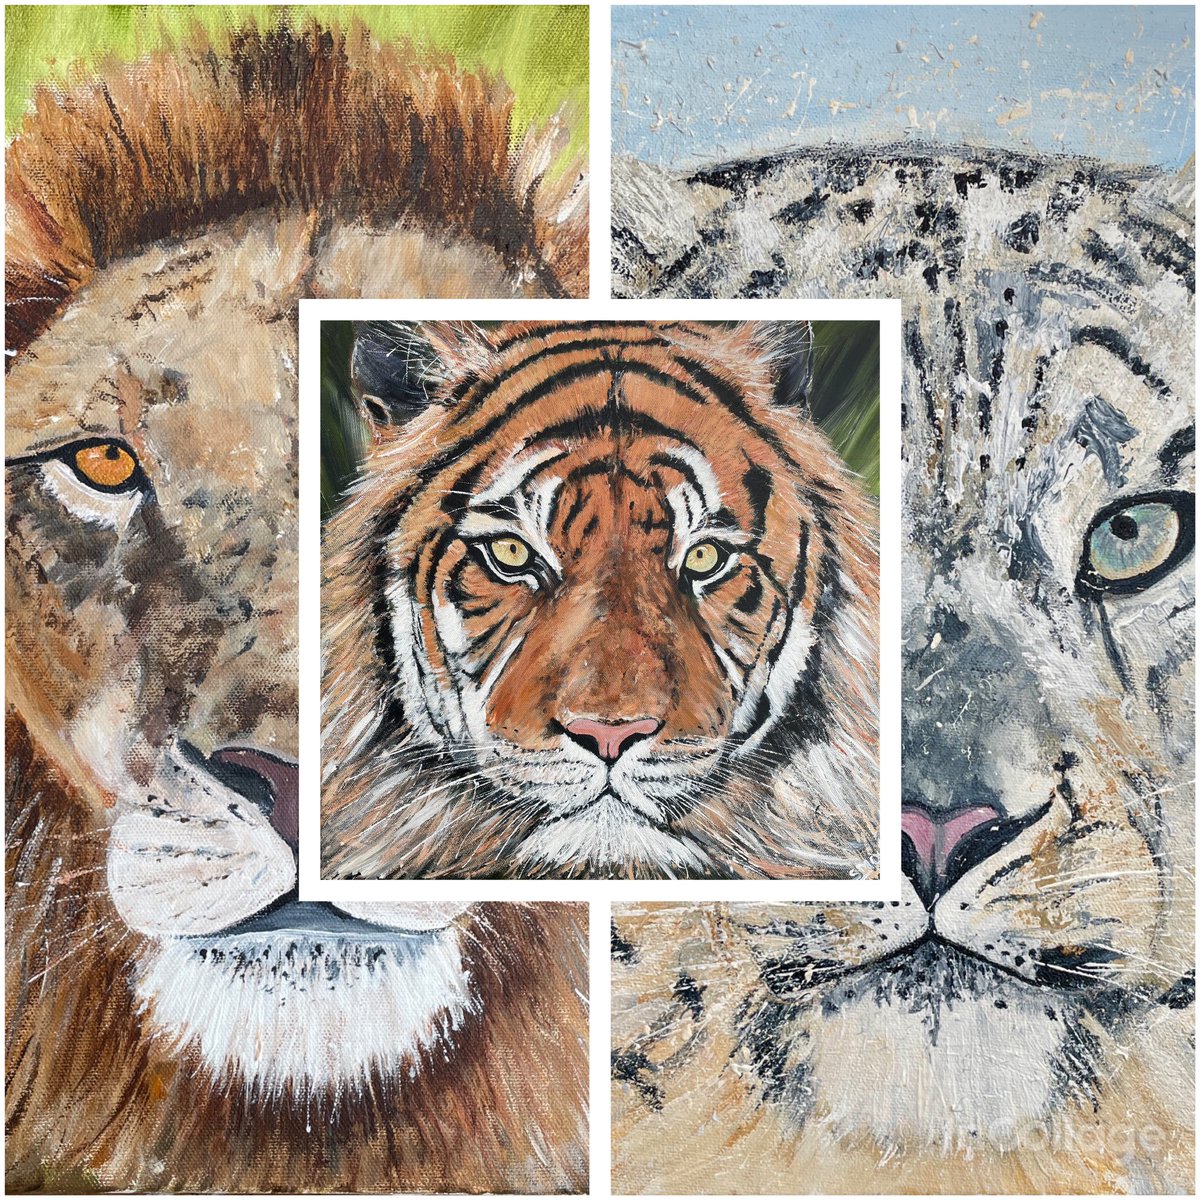 𝗪𝗶𝗹𝗱𝗹𝗶𝗳𝗲 𝗔𝗿𝘁 #MHHSBD Day 12 of the MHHSBD challenge and the word for today is WILDLIFE. I love painting wildlife here’s a little selection of my work Please message me for me details on any of these big cat portraits